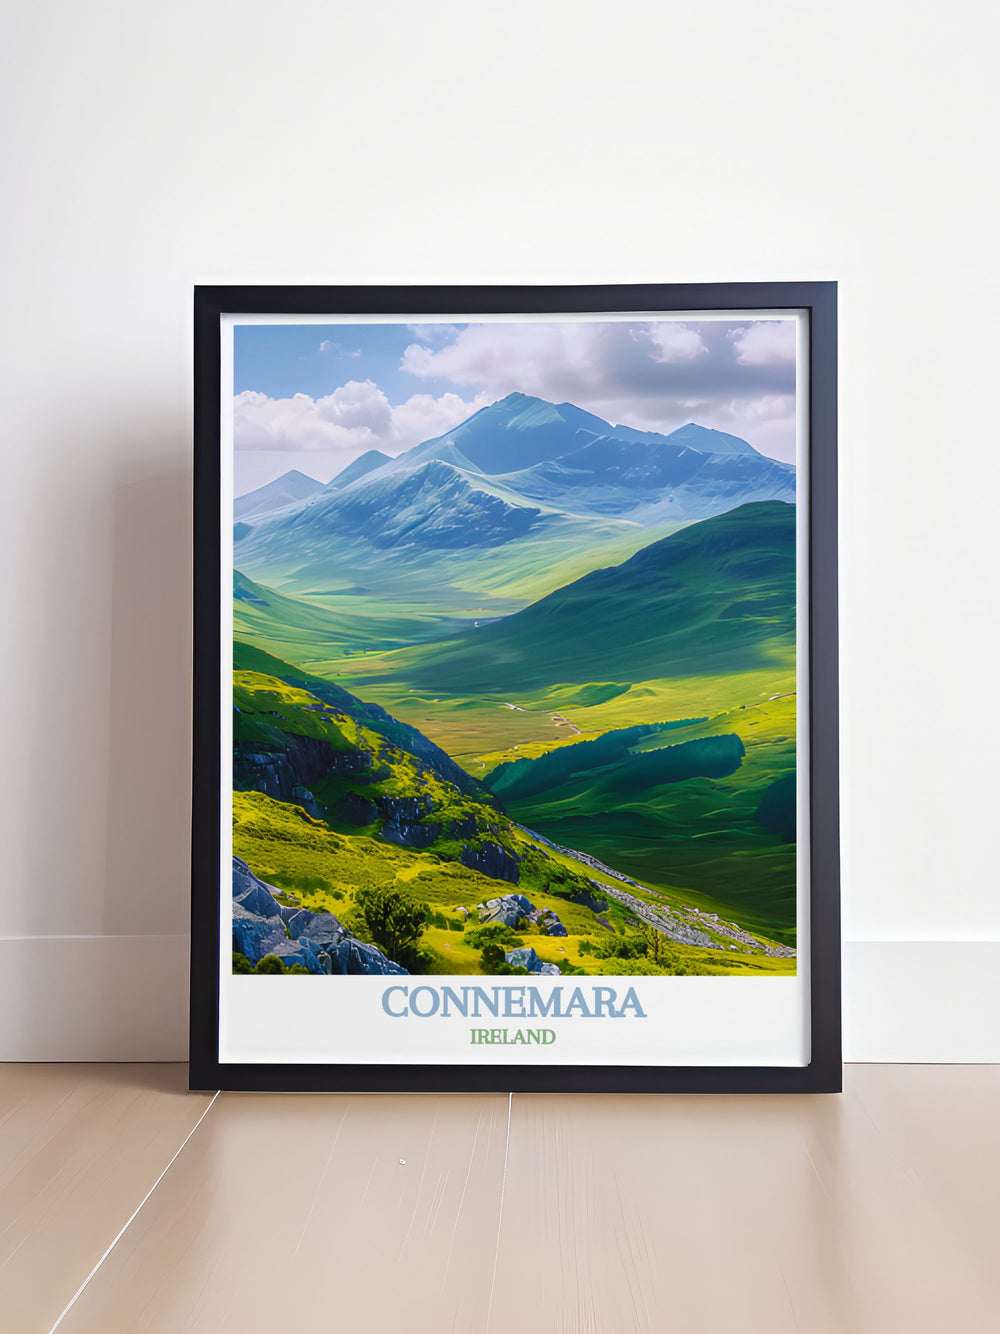 Capture the essence of the Twelve Bens in Connemara with our detailed art prints, showcasing the stunning peaks and serene valleys that make this mountain range a highlight of County Galway.